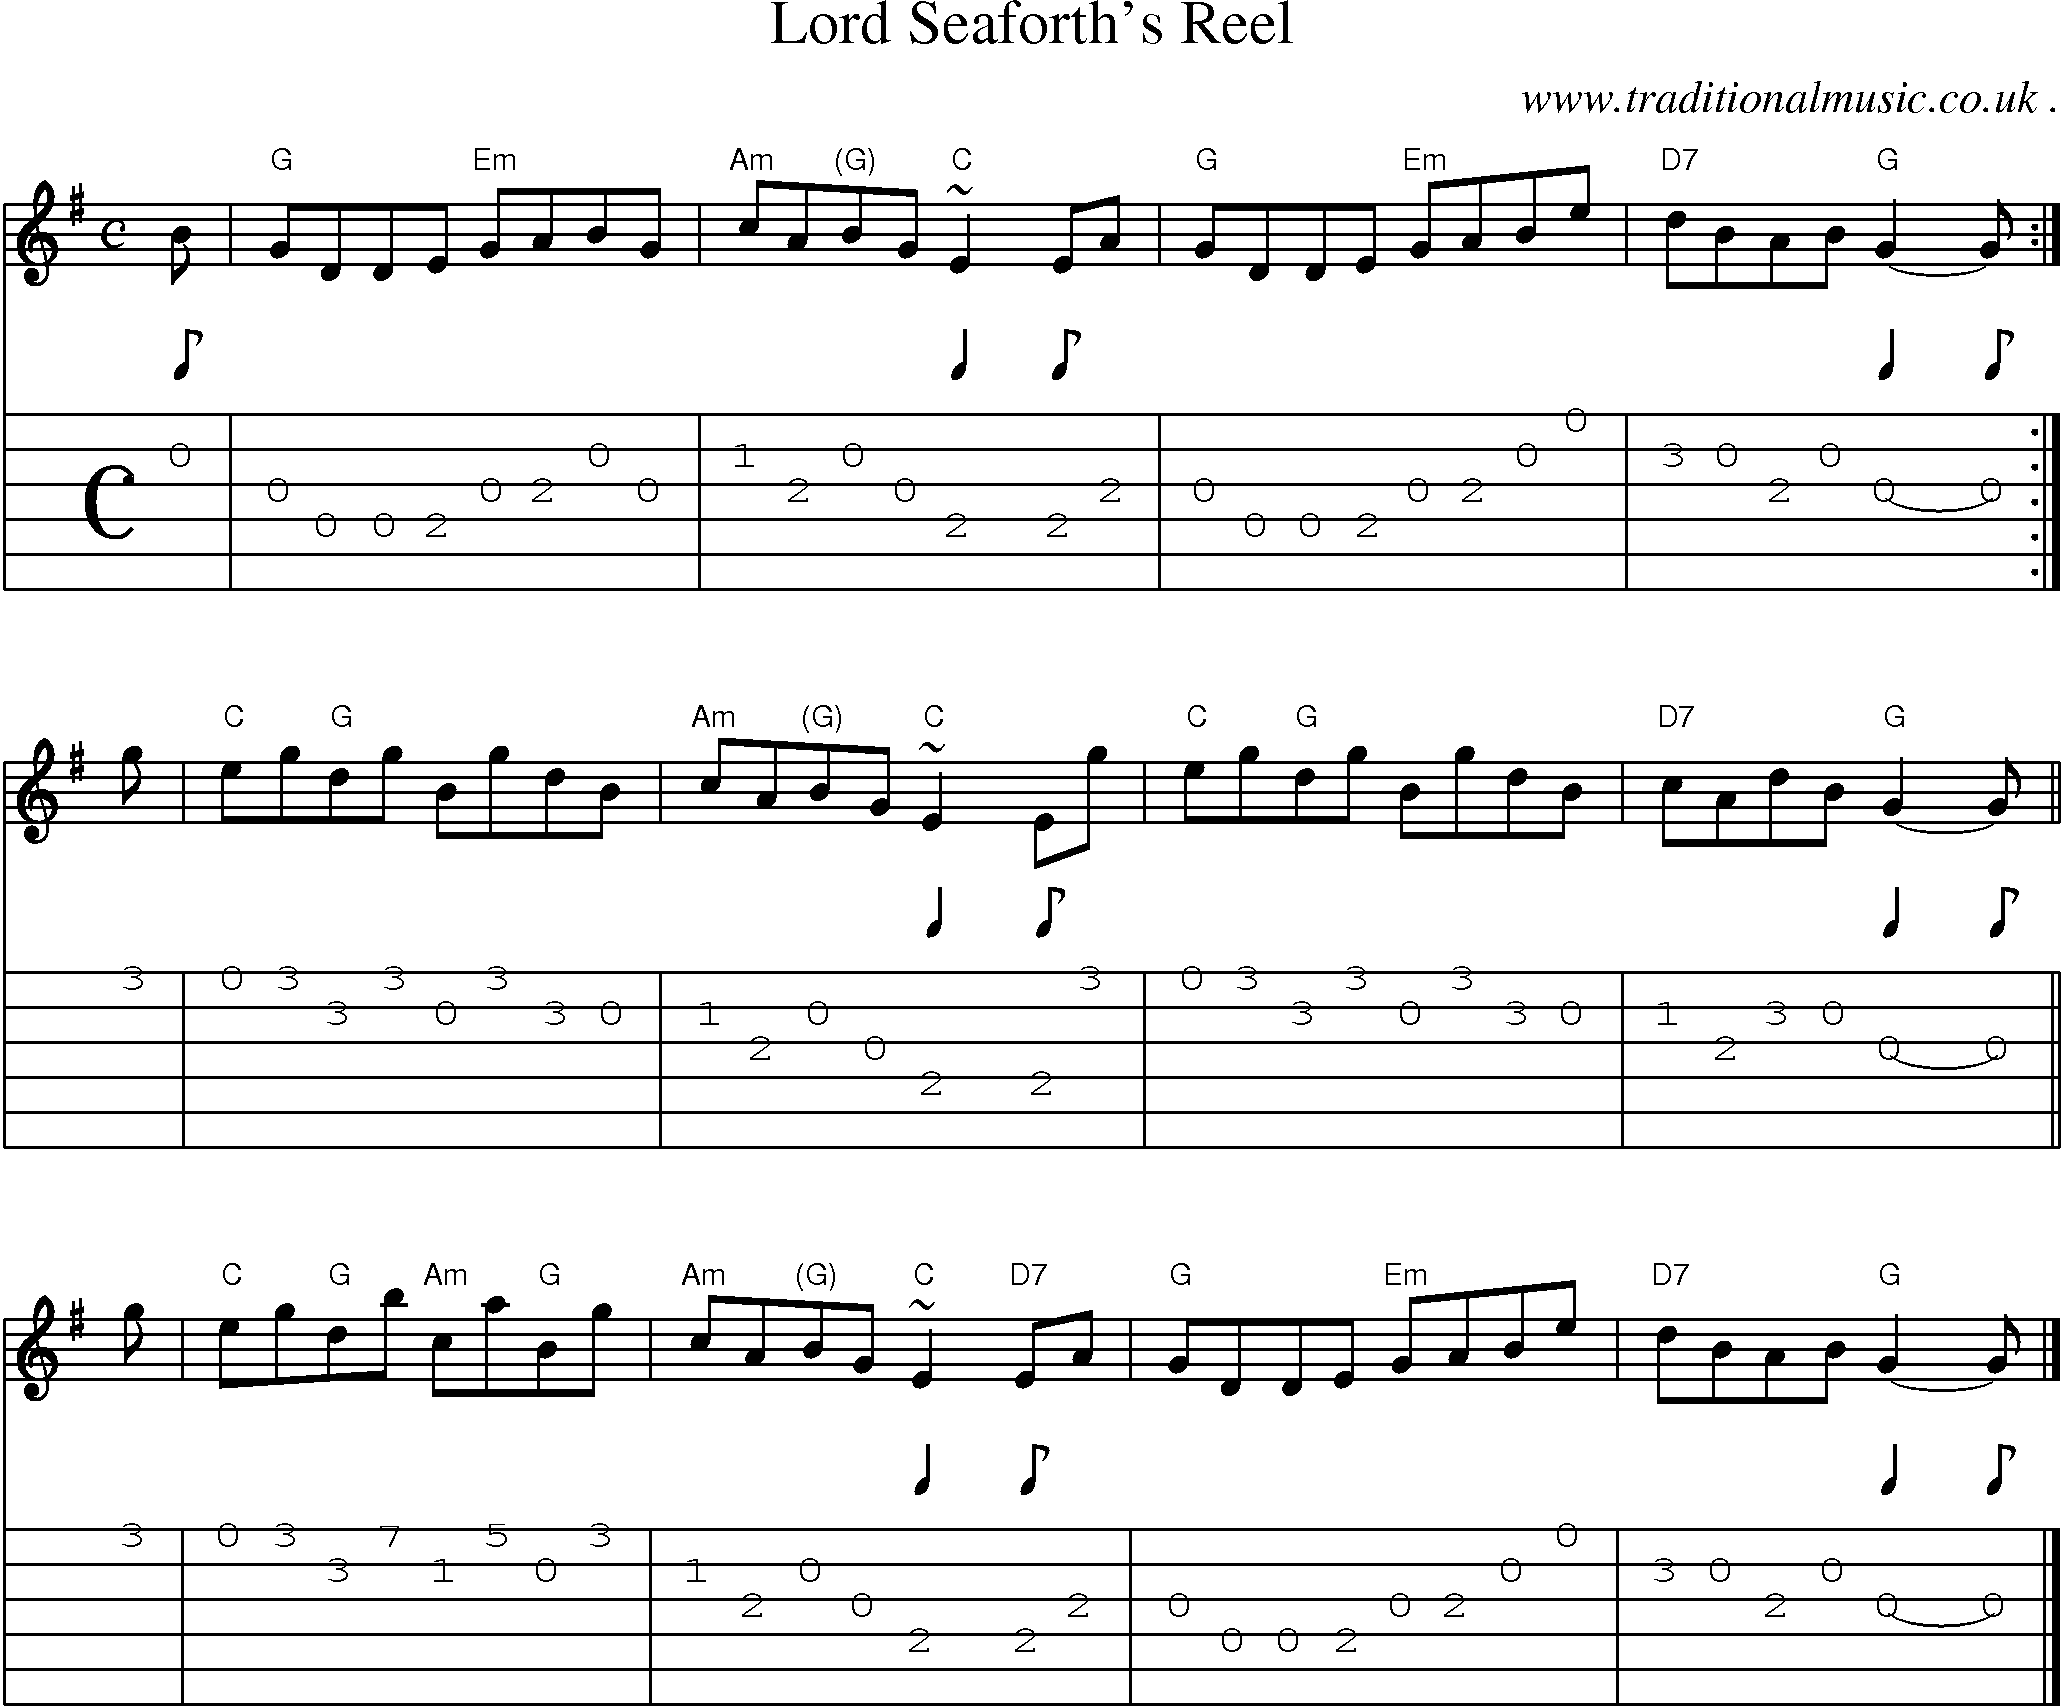 Sheet-music  score, Chords and Guitar Tabs for Lord Seaforths Reel